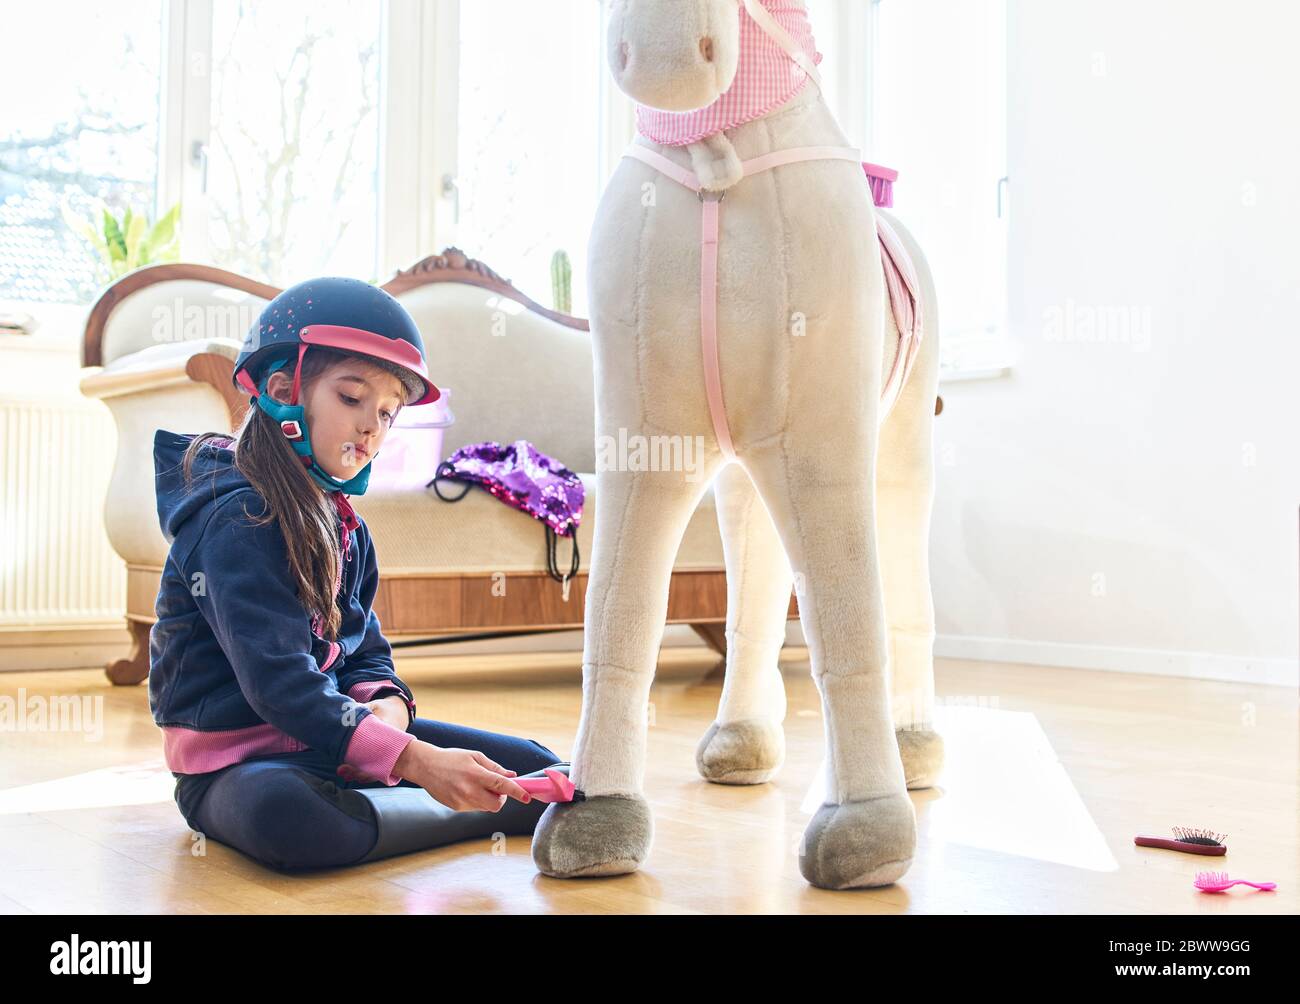 Girl grooming her toy horse at home Stock Photo